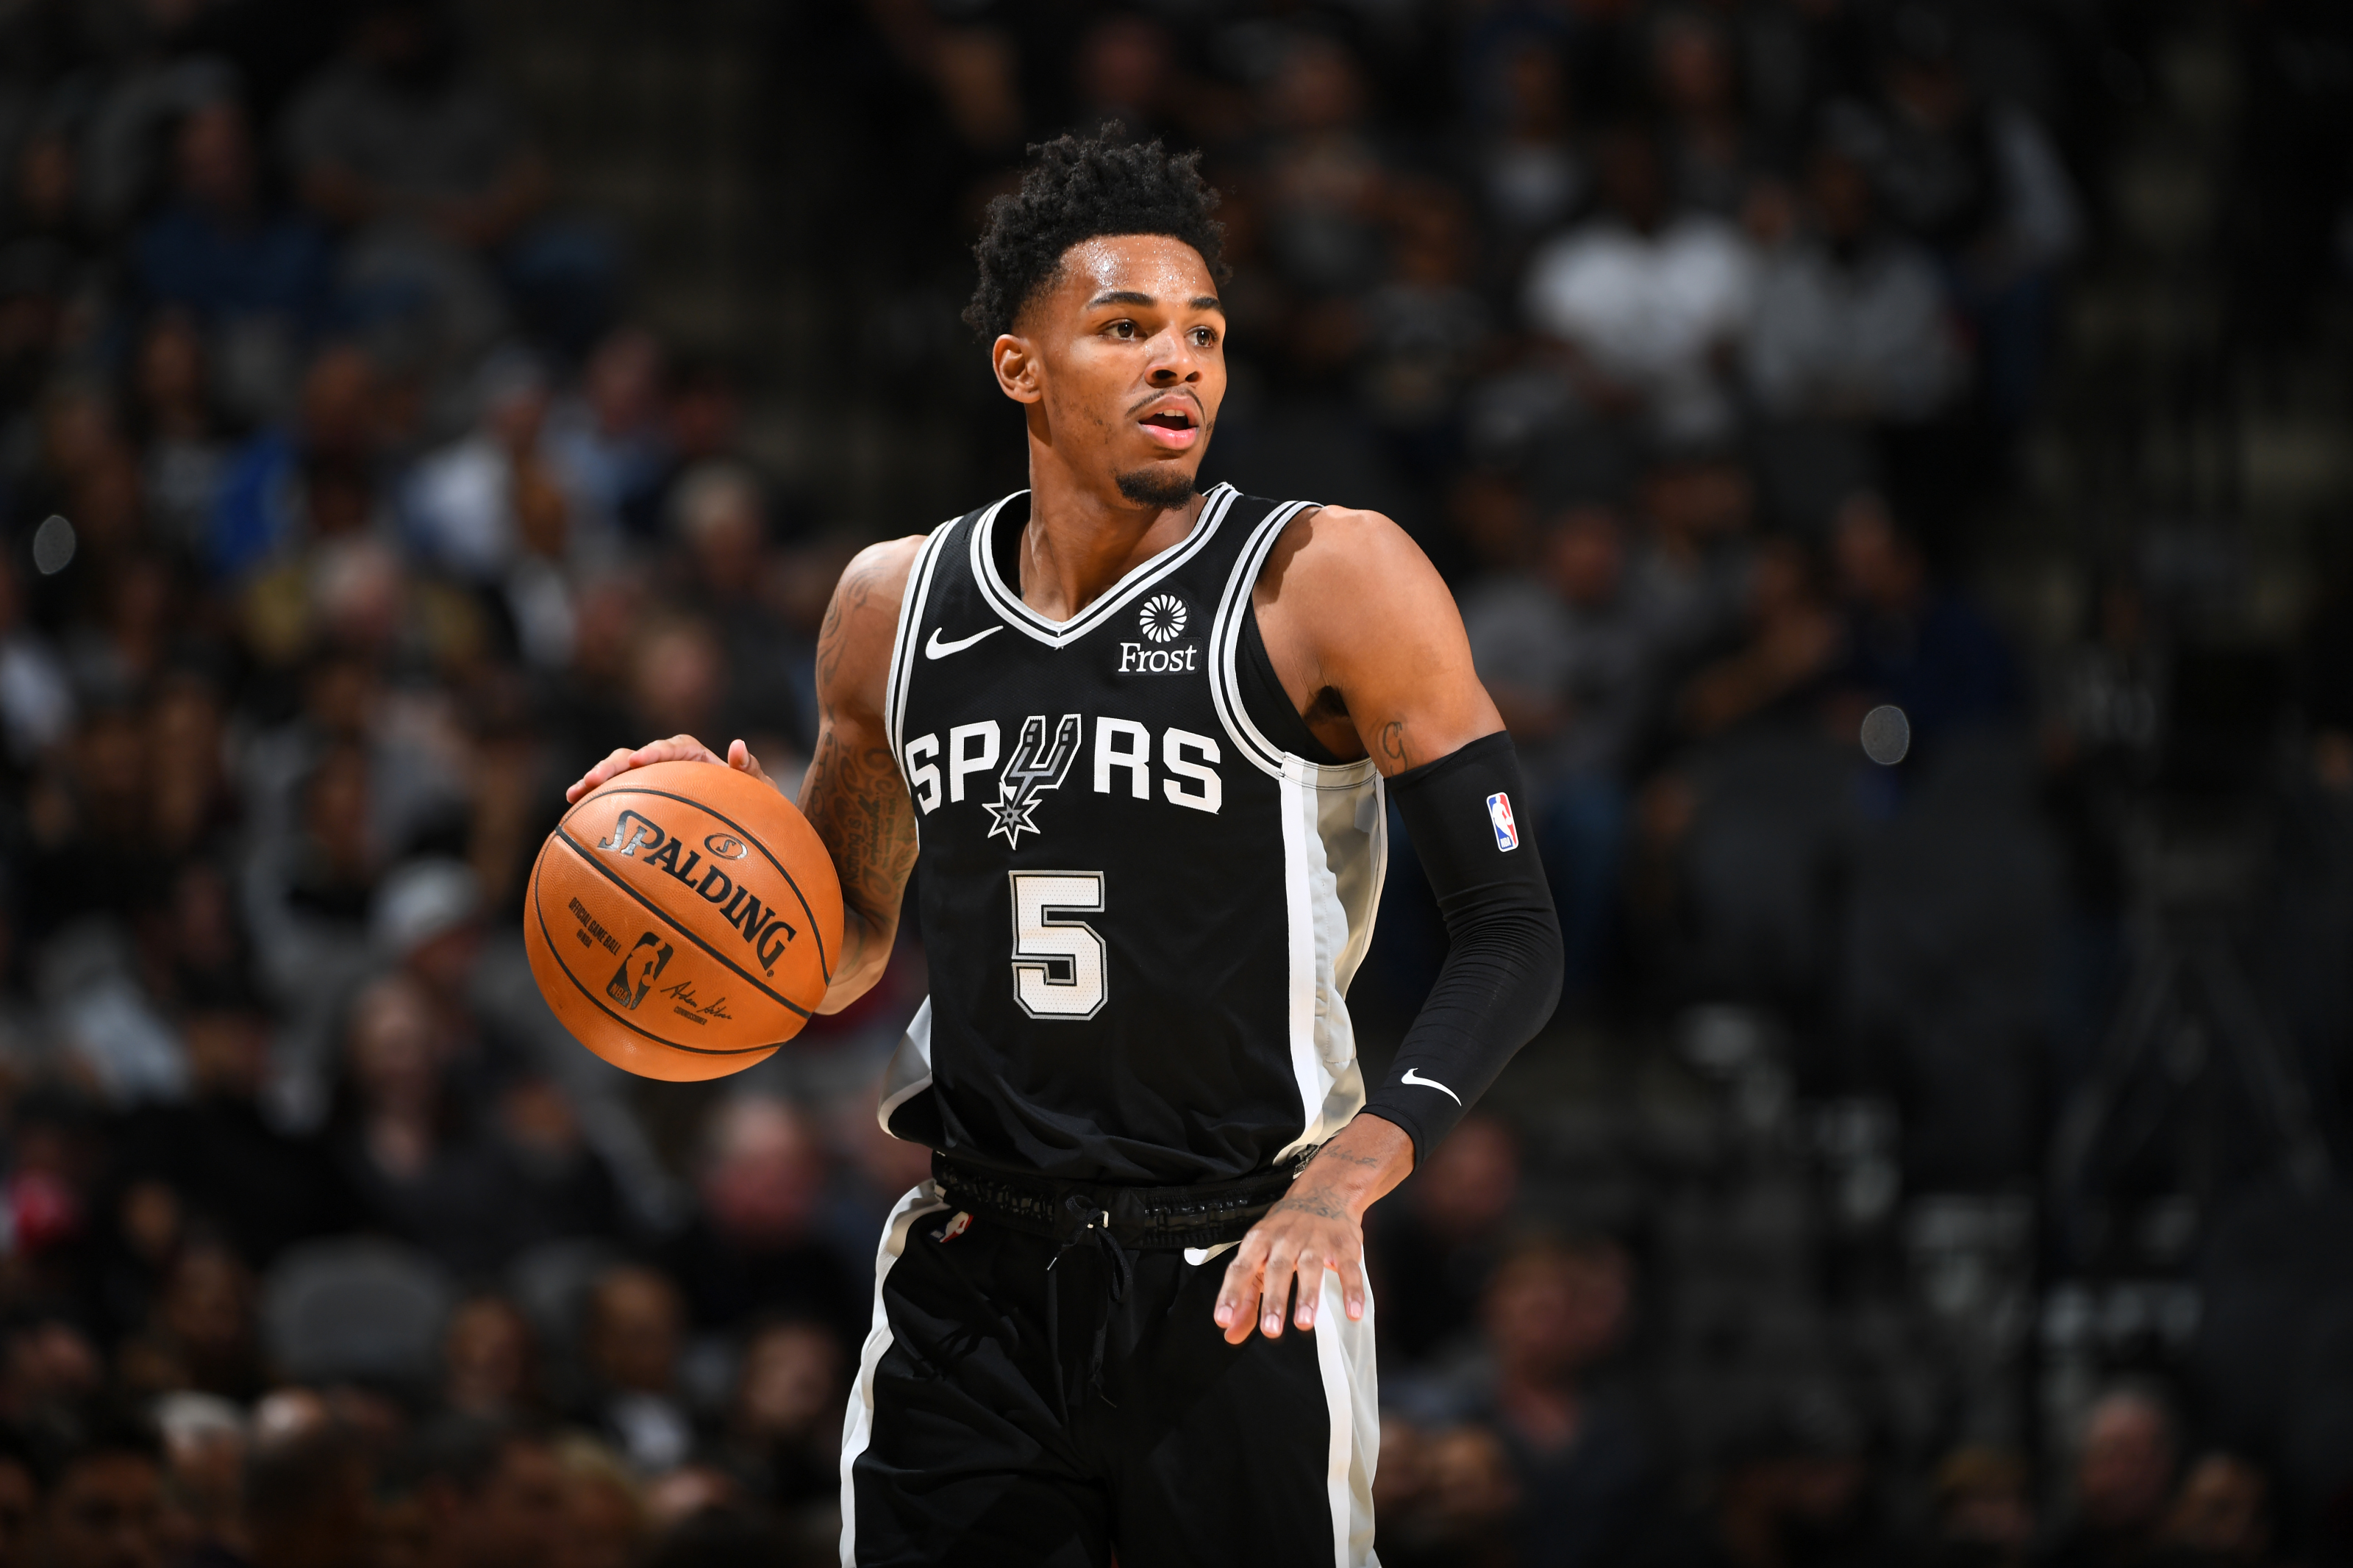 Spurs' Dejounte Murray could become best rebounding guard in the NBA